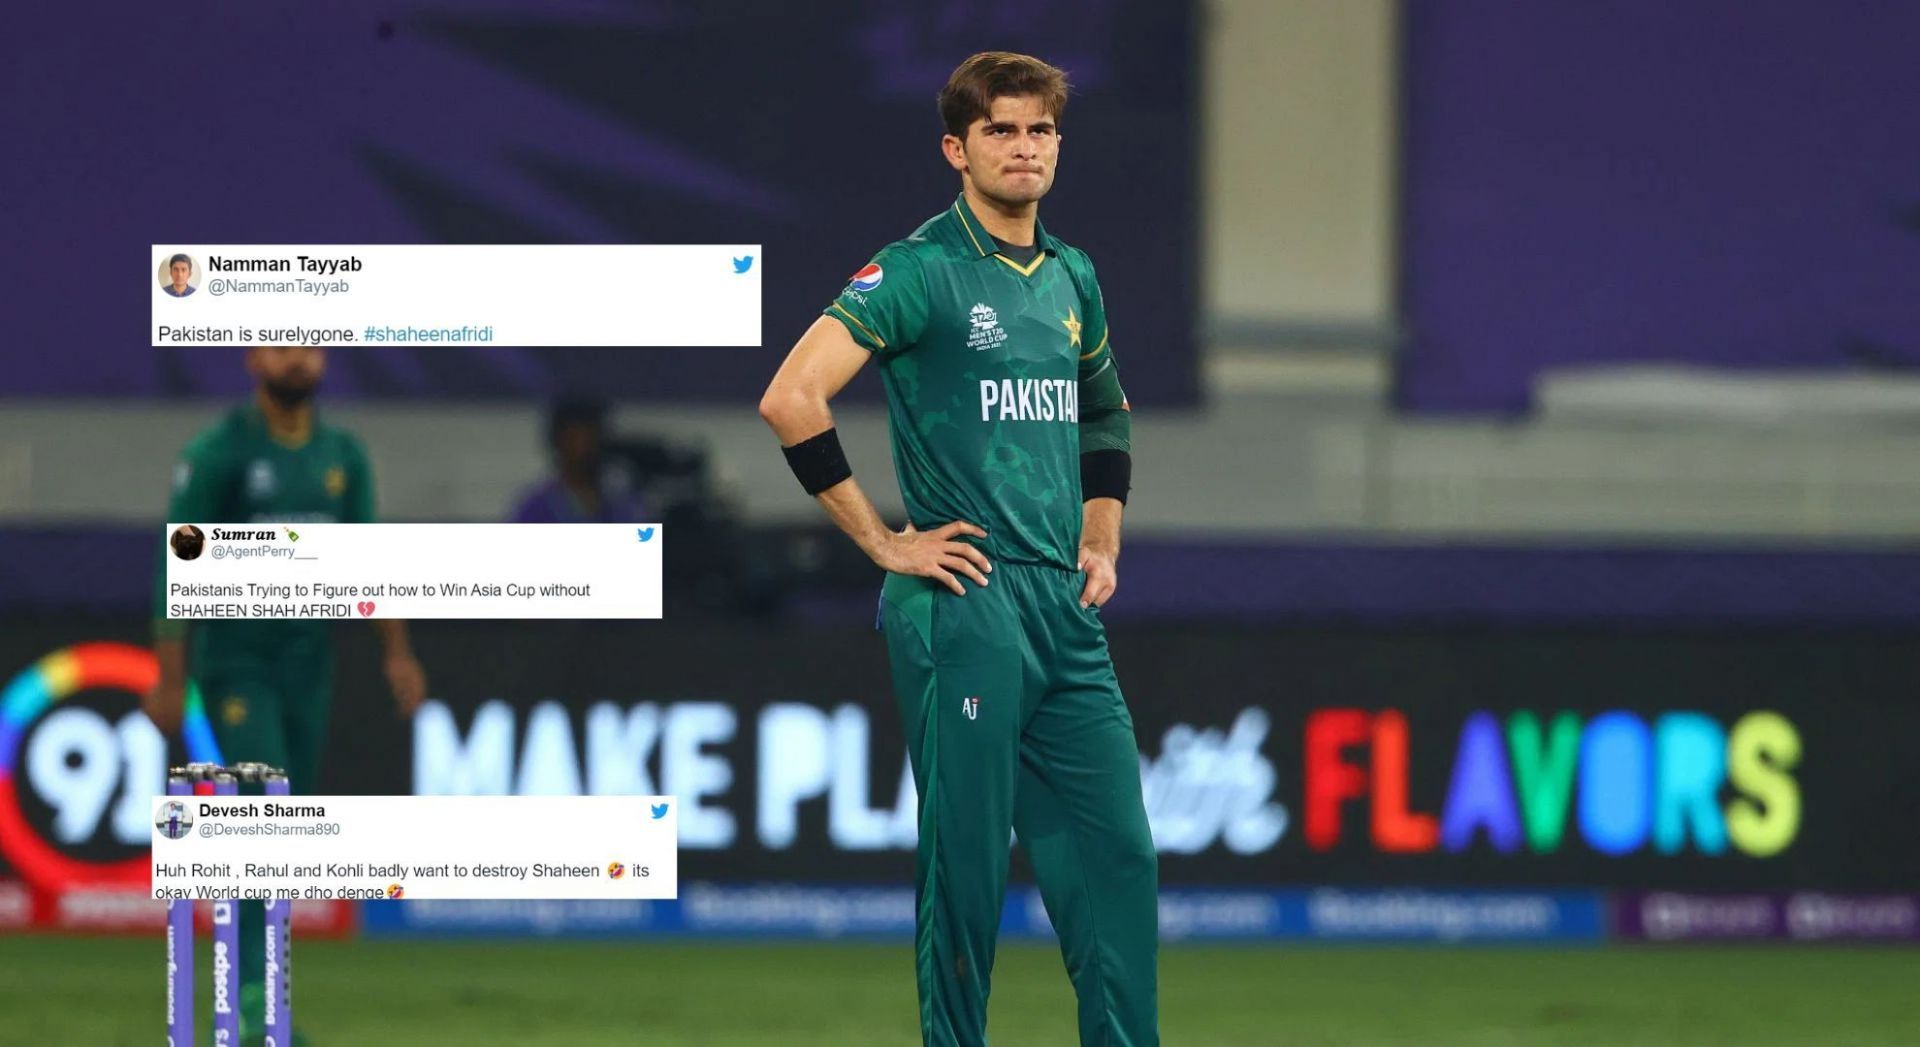 Shaheen Afridi has been a top performer for Pakistan in recent times